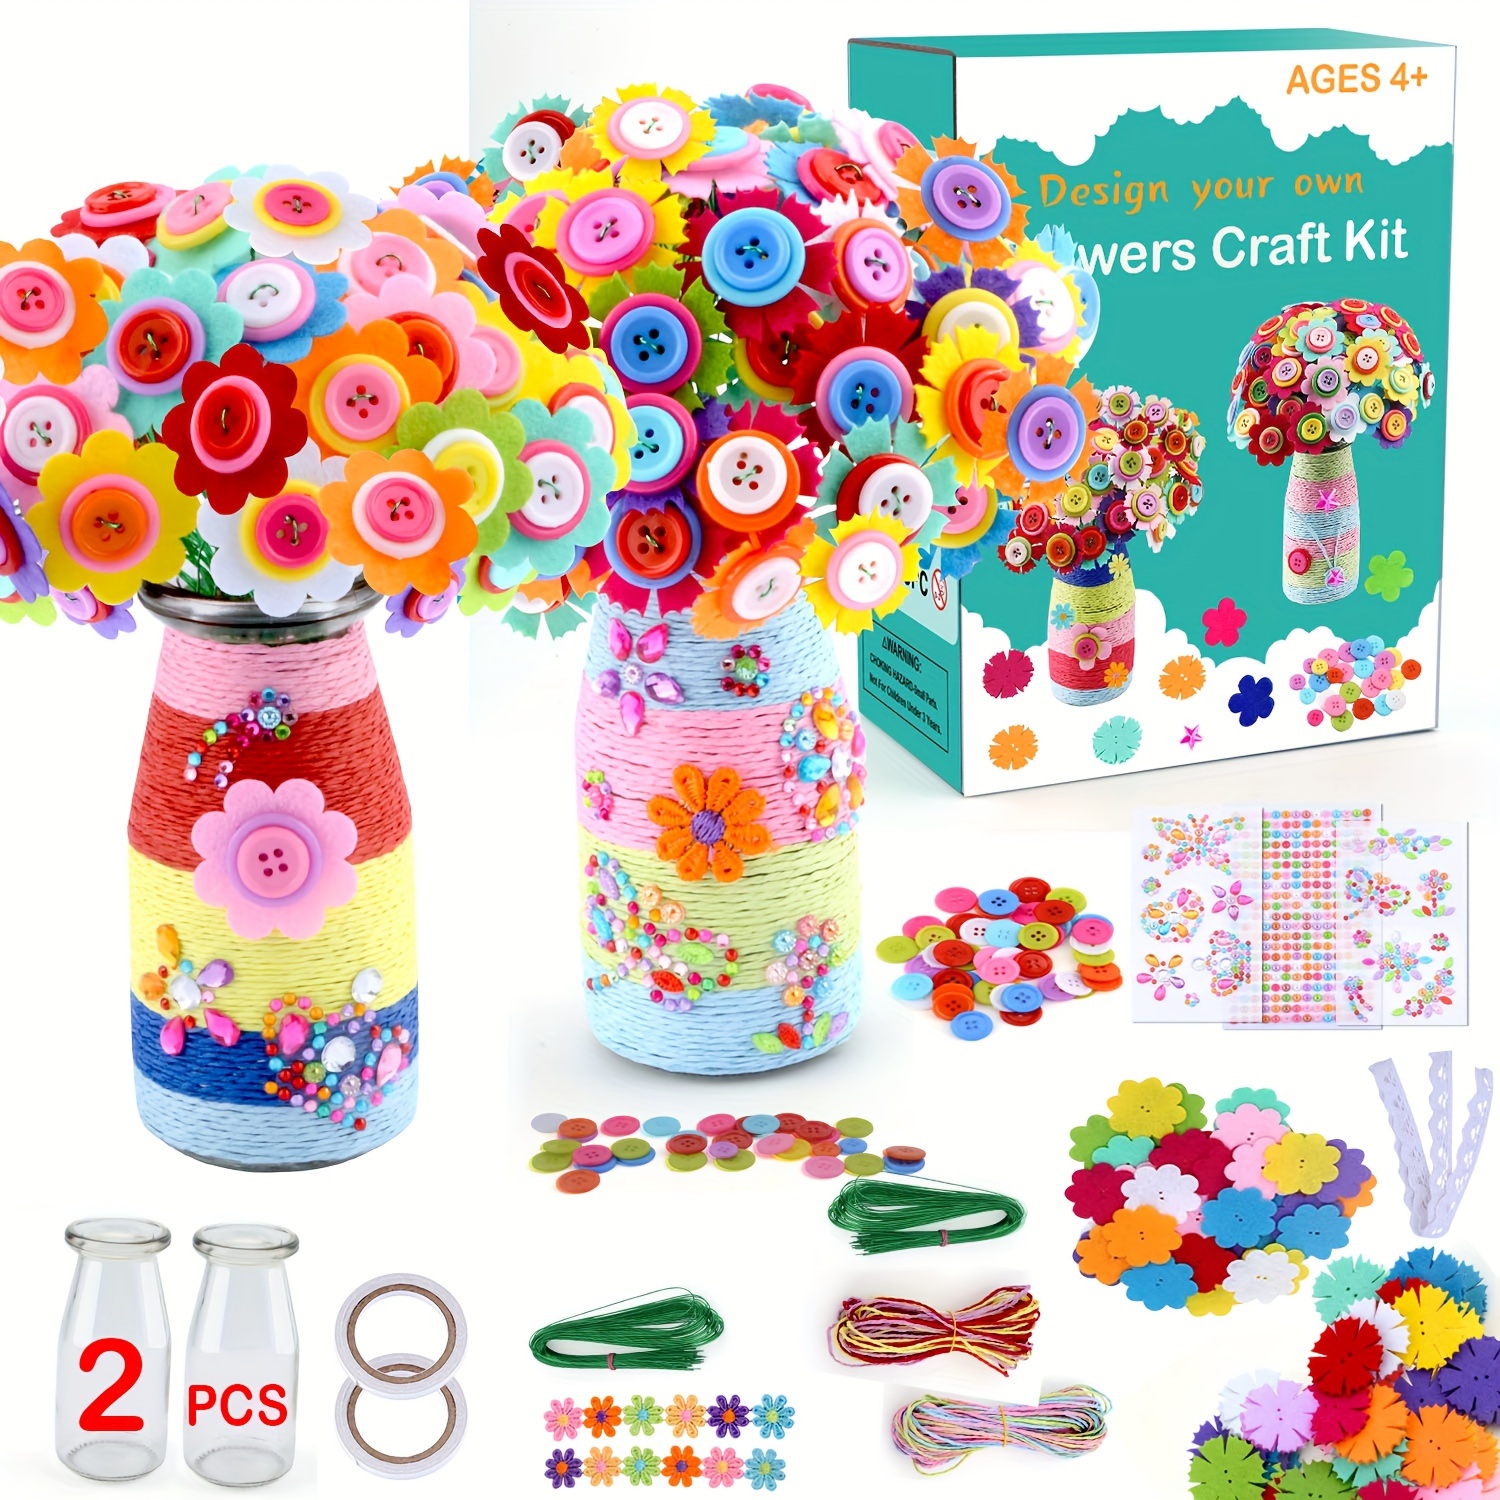 

Crafts For Girls Ages 4-12 Gift Make Your Own Flower Bouquet With Buttons Felt Flowers, Graduation Gifts Vase Art And Craft For Children - Diy Activity For Boys & Girls Age 6 7 8 9 10 11 12 Year Old